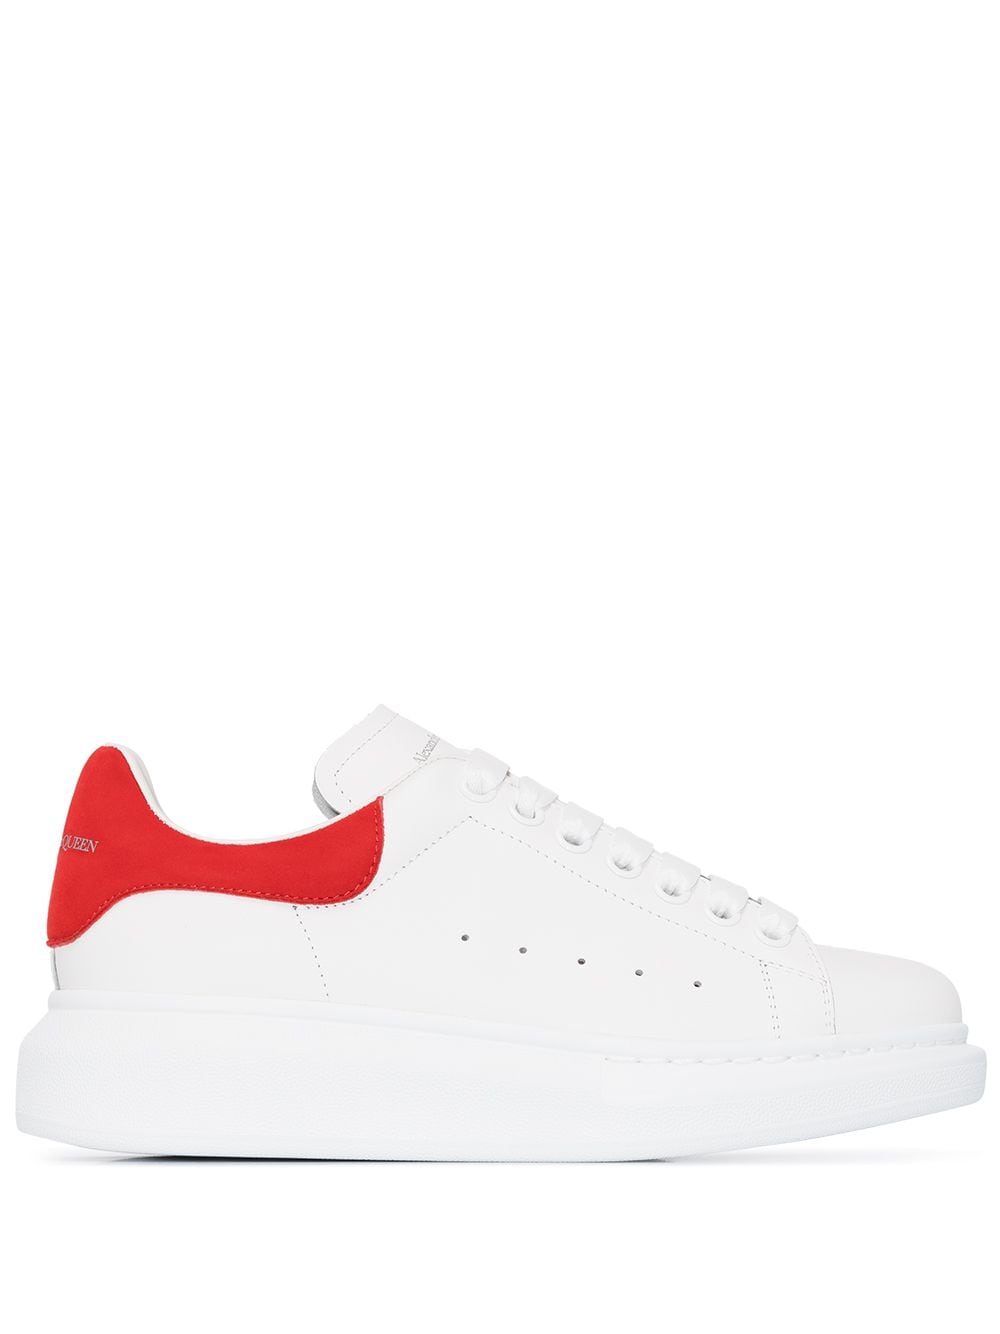 White/red leather/suede oversized low-top sneakers